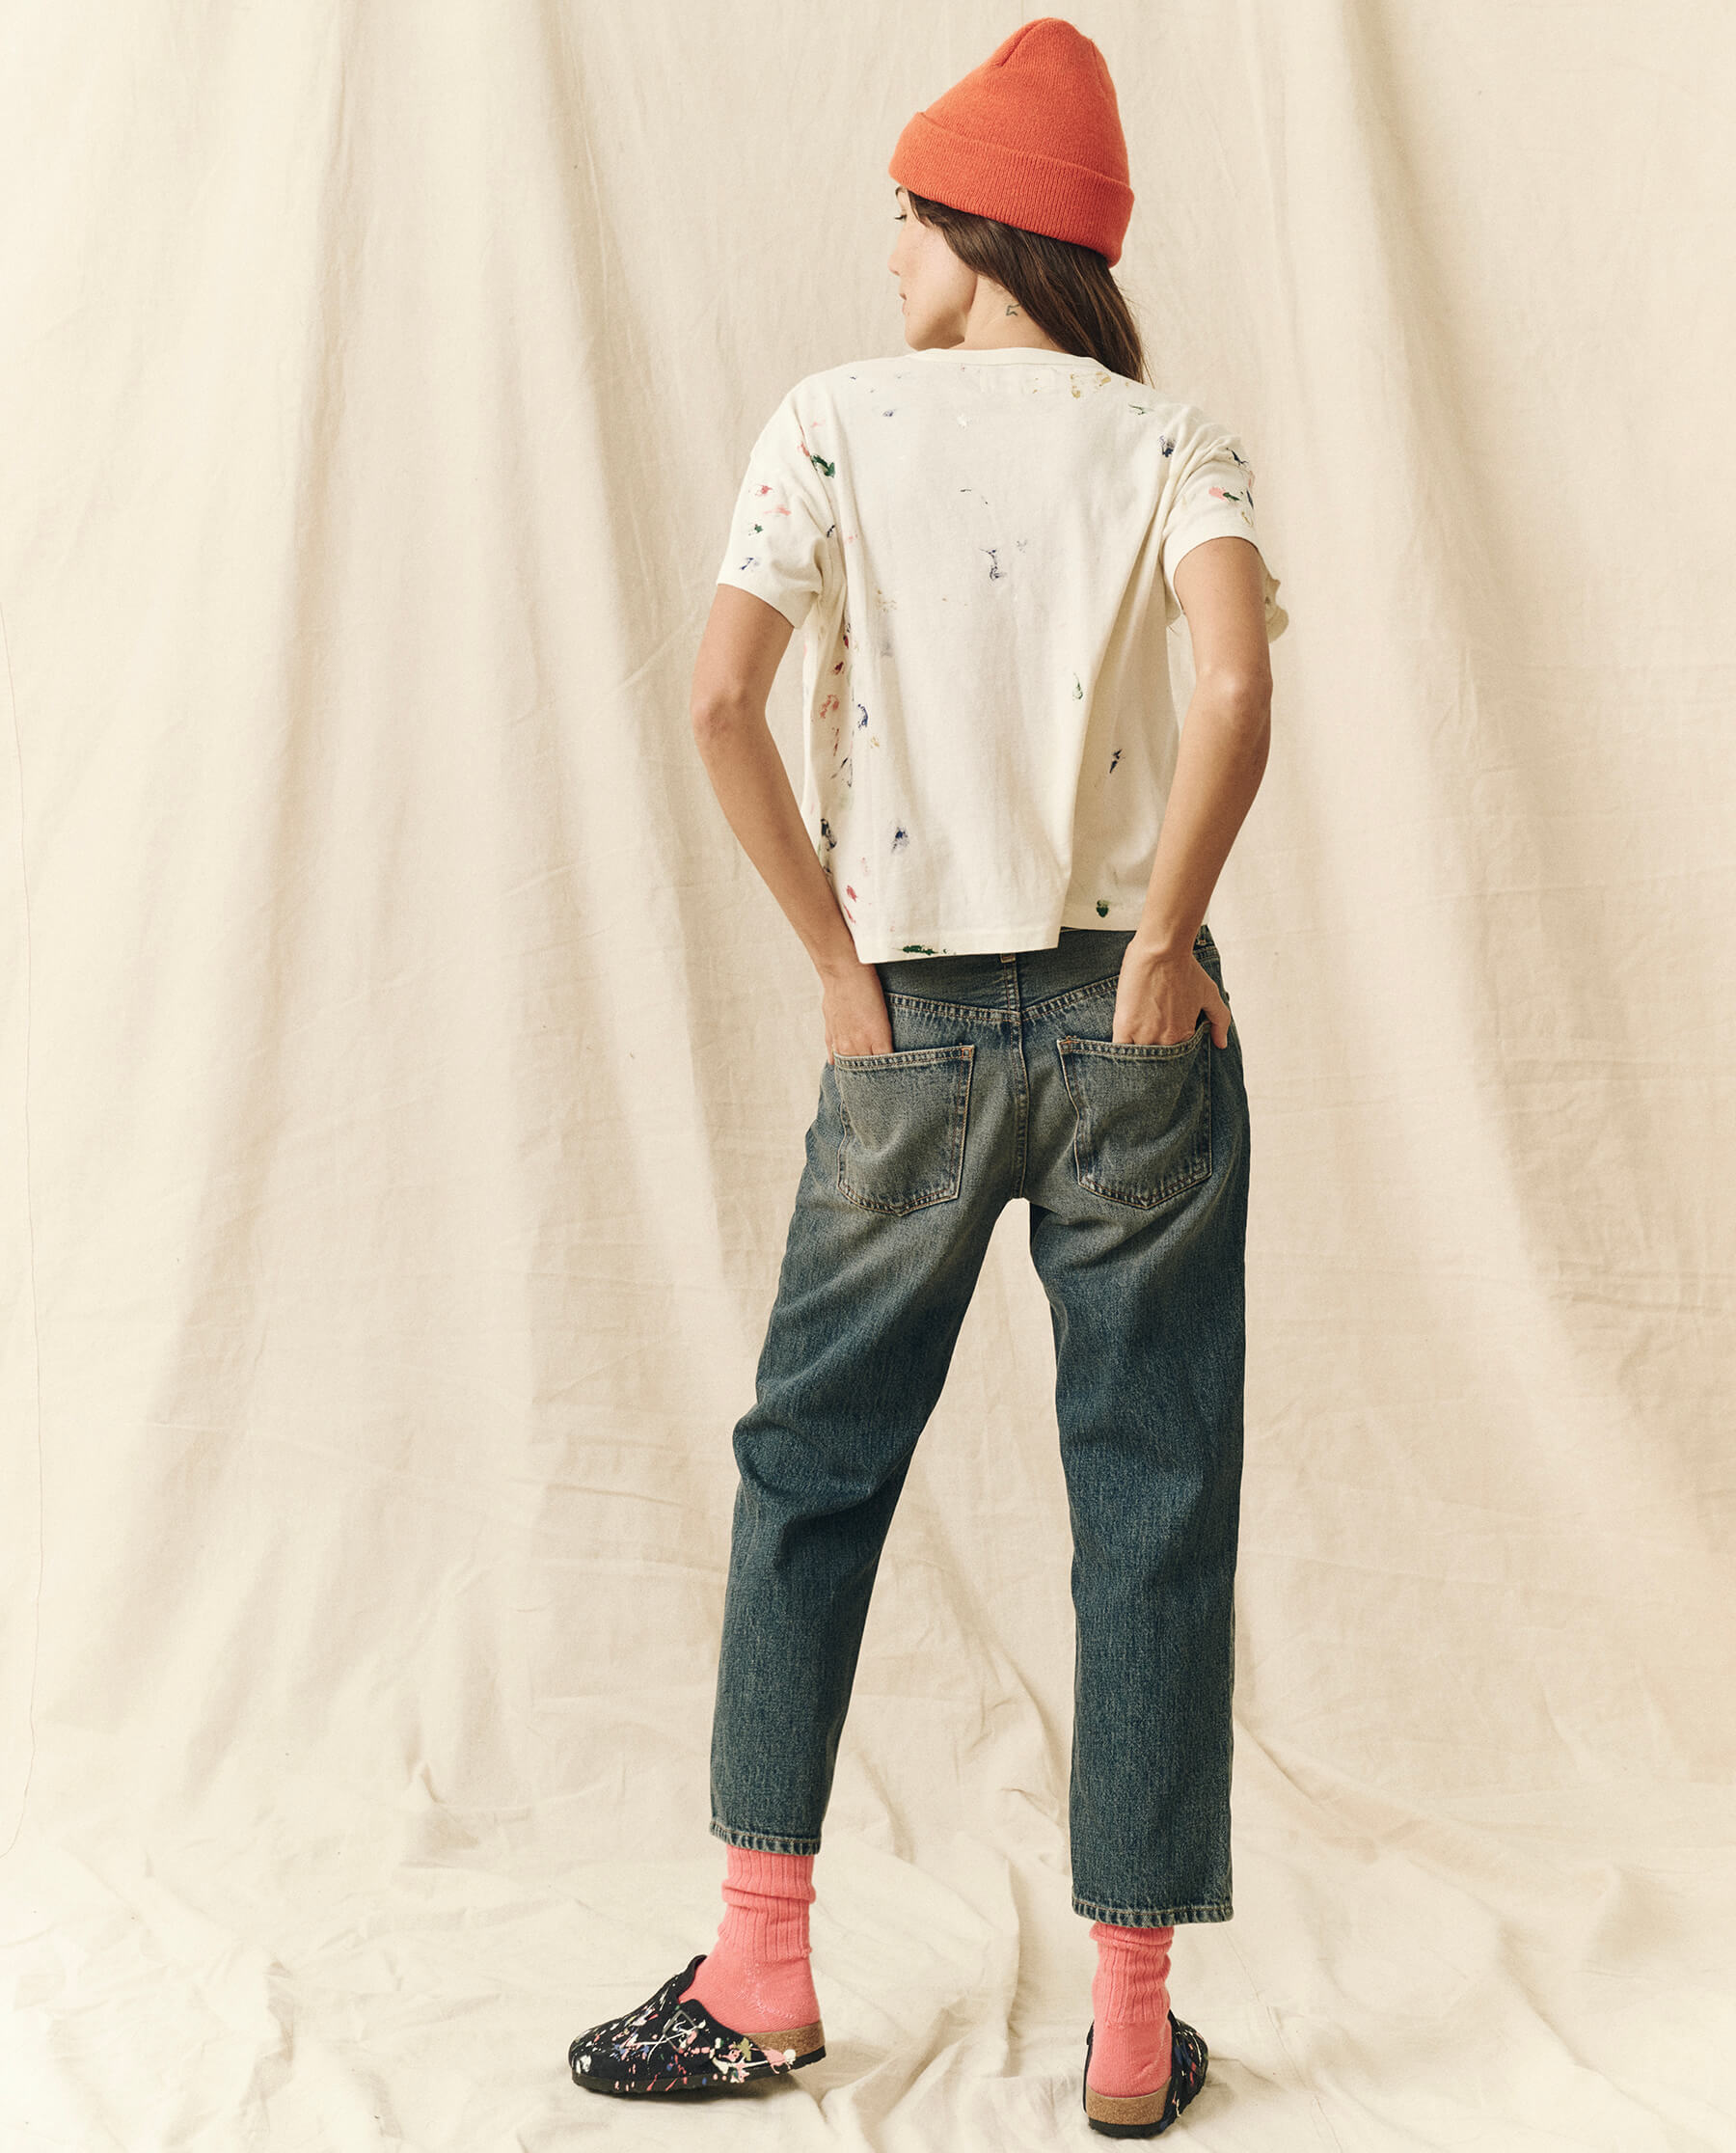 The Pocket Tee. Novelty -- Washed White with Paint